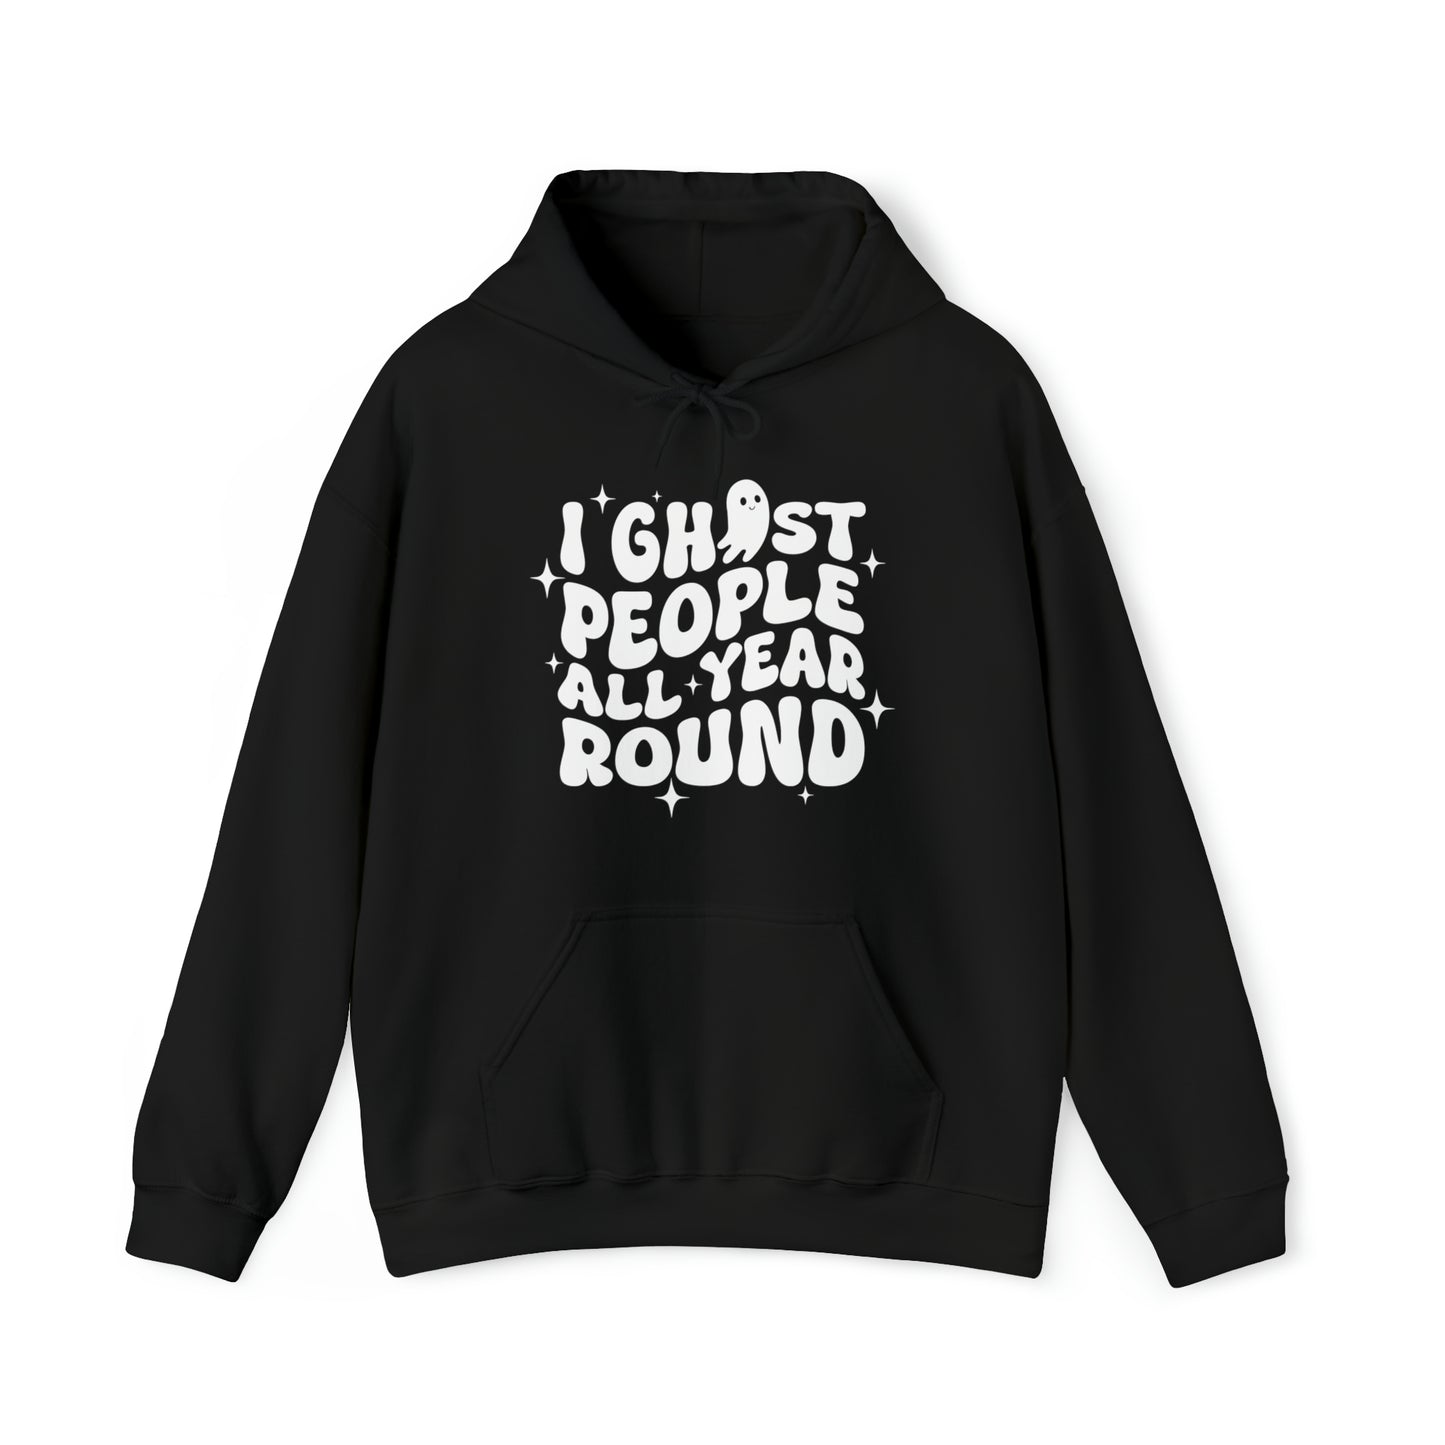 I Ghost People All Year Round Hoodie by The Dark Side of Fashion